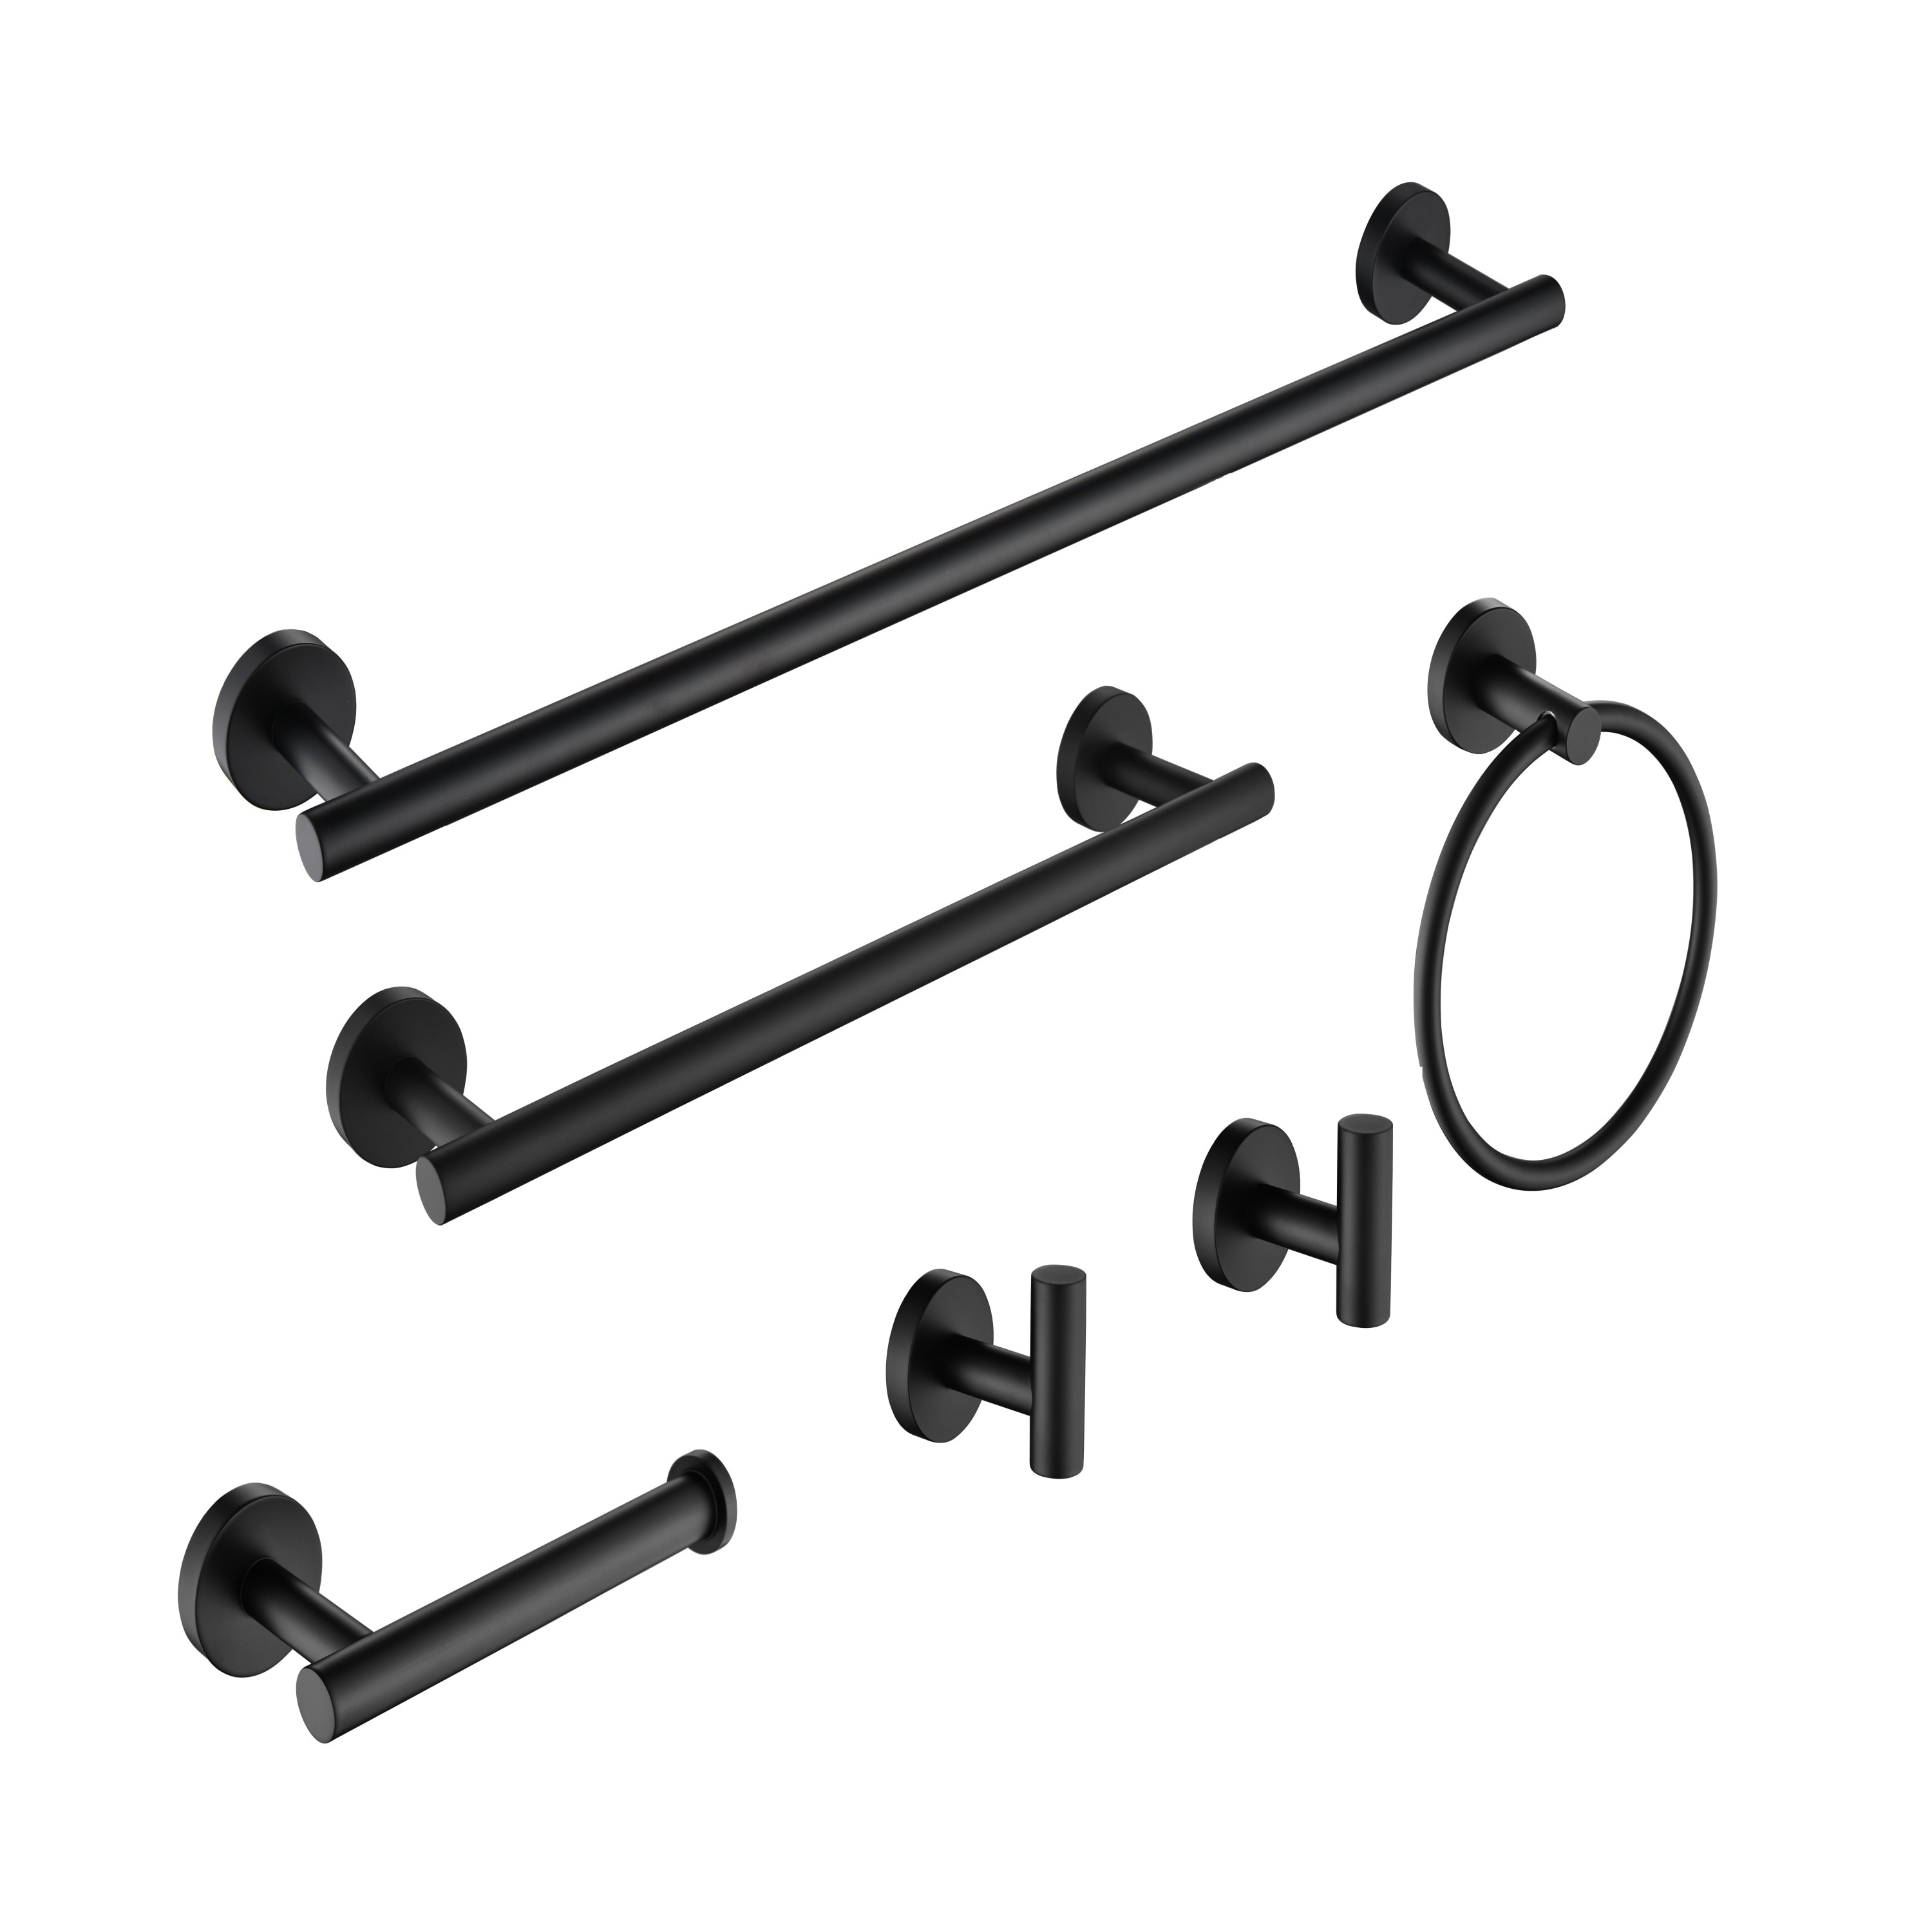 6 Piece Stainless Steel Bathroom Towel Rack Set, Wall Mount Bathroom Accessories Kit, Silver, Size: 26.18 inch x 9.25 inch x 2.75 inch